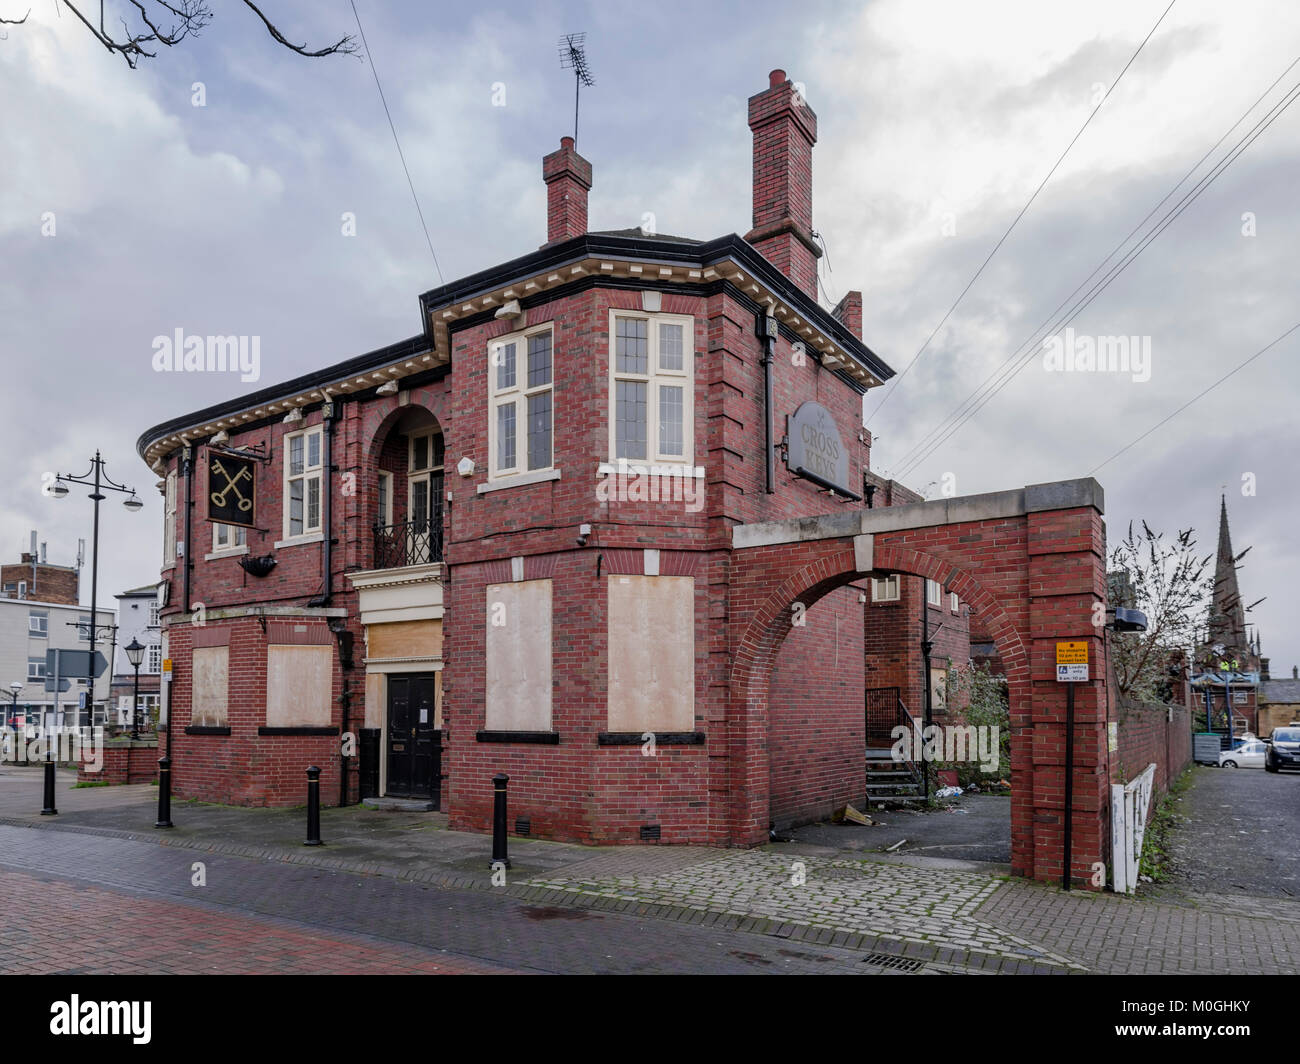 Photographic record of buildings in Rotherham town centre, Wellgate, Rotherham Minster inside and Outside and a number of disused former public houses Stock Photo